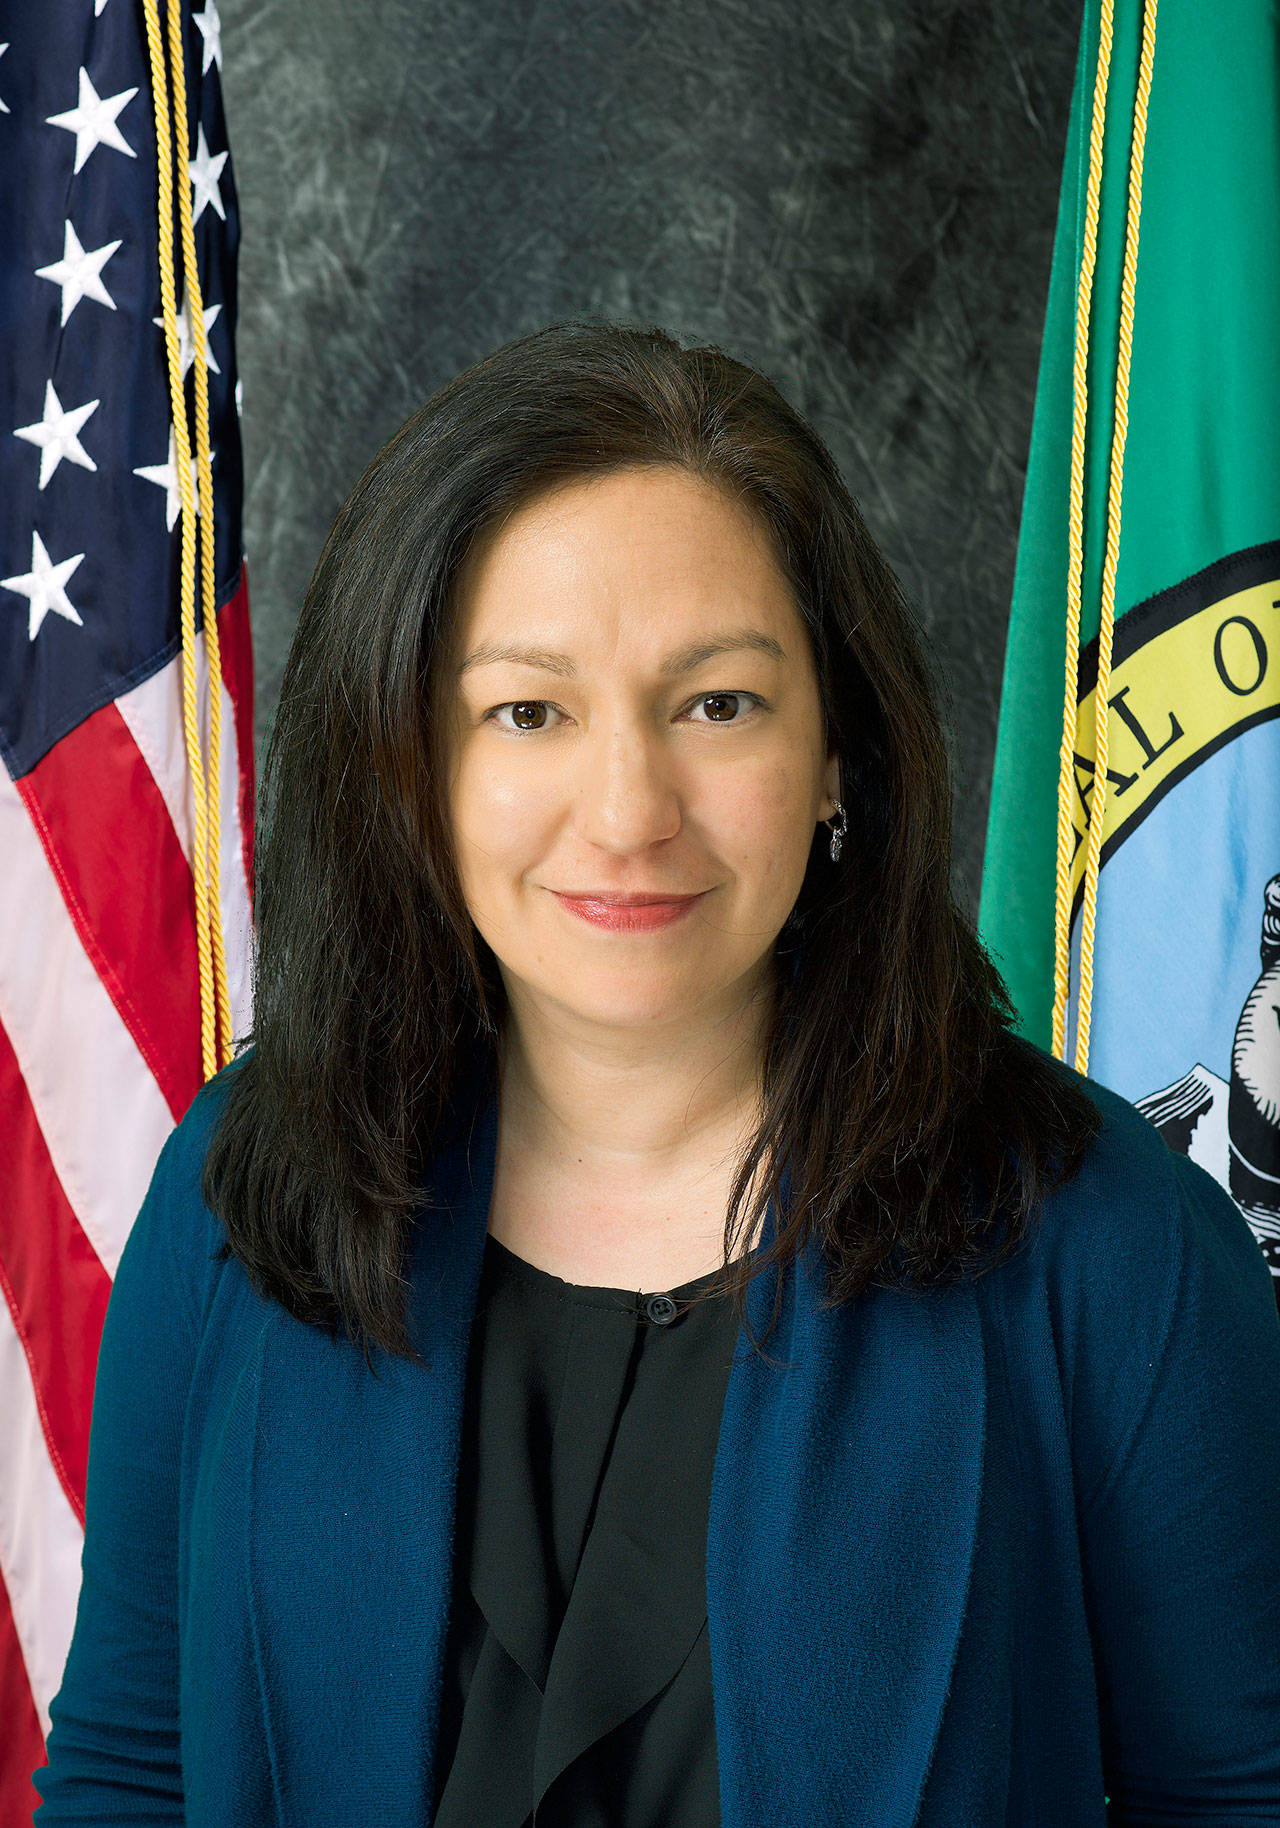 Federal Way Police Department Crime Analyst Michelle Roy was named the Mirror’s February Citizen of the Month. Courtesy photo.